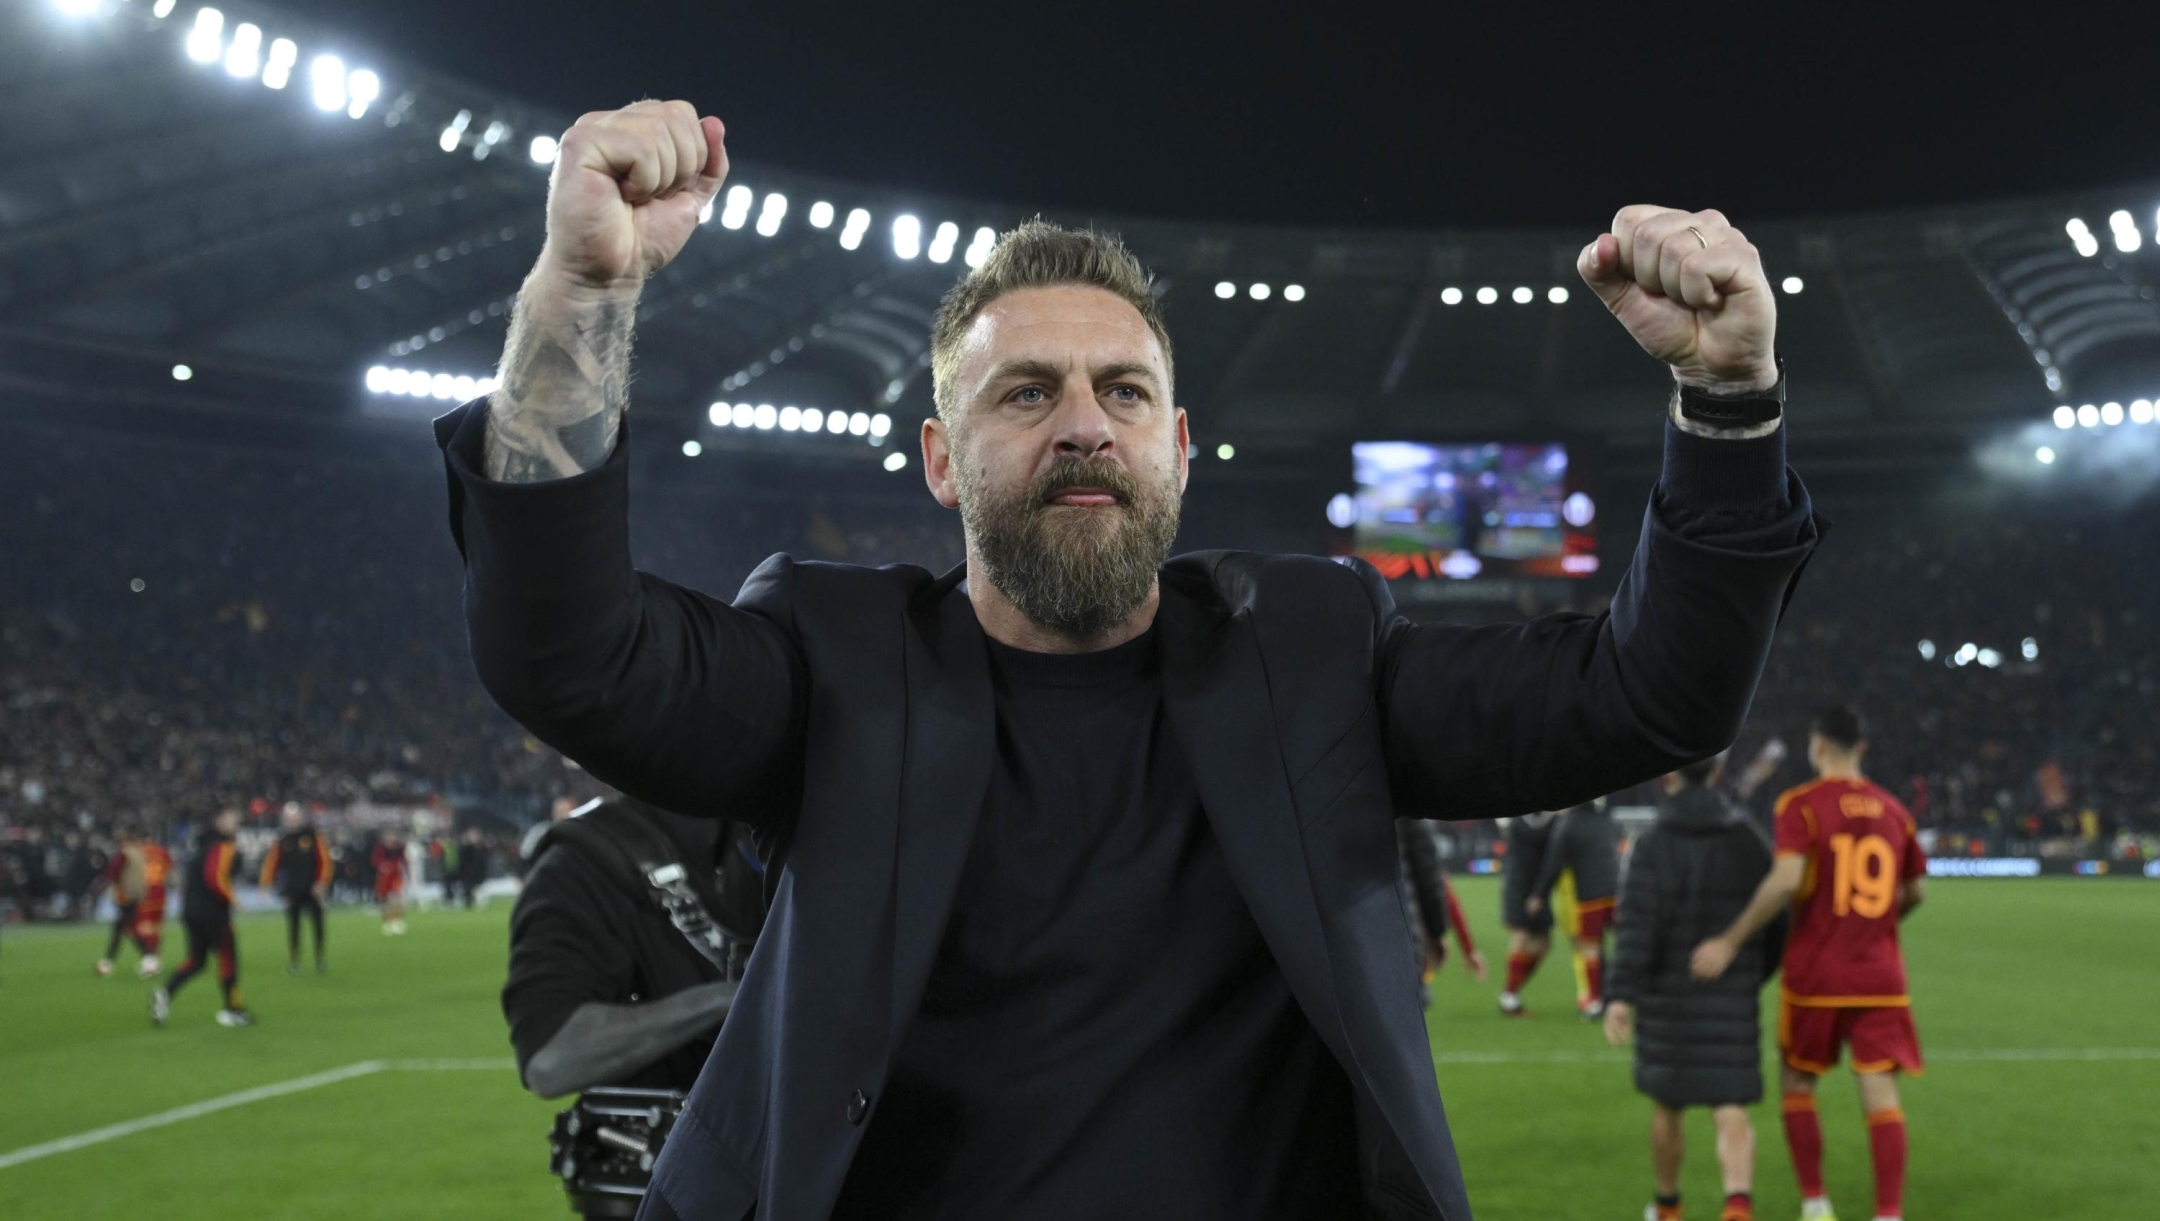 ROME, ITALY - FEBRUARY 22: Head coach Daniele De Rossi of AS Roma celebrates after the penalty shootout during the UEFA Europa League 2023/24 knockout round play-offs second leg match between AS Roma and Feyenoord at Stadio Olimpico on February 22, 2024 in Rome, Italy. (Photo by Luciano Rossi/AS Roma via Getty Images)